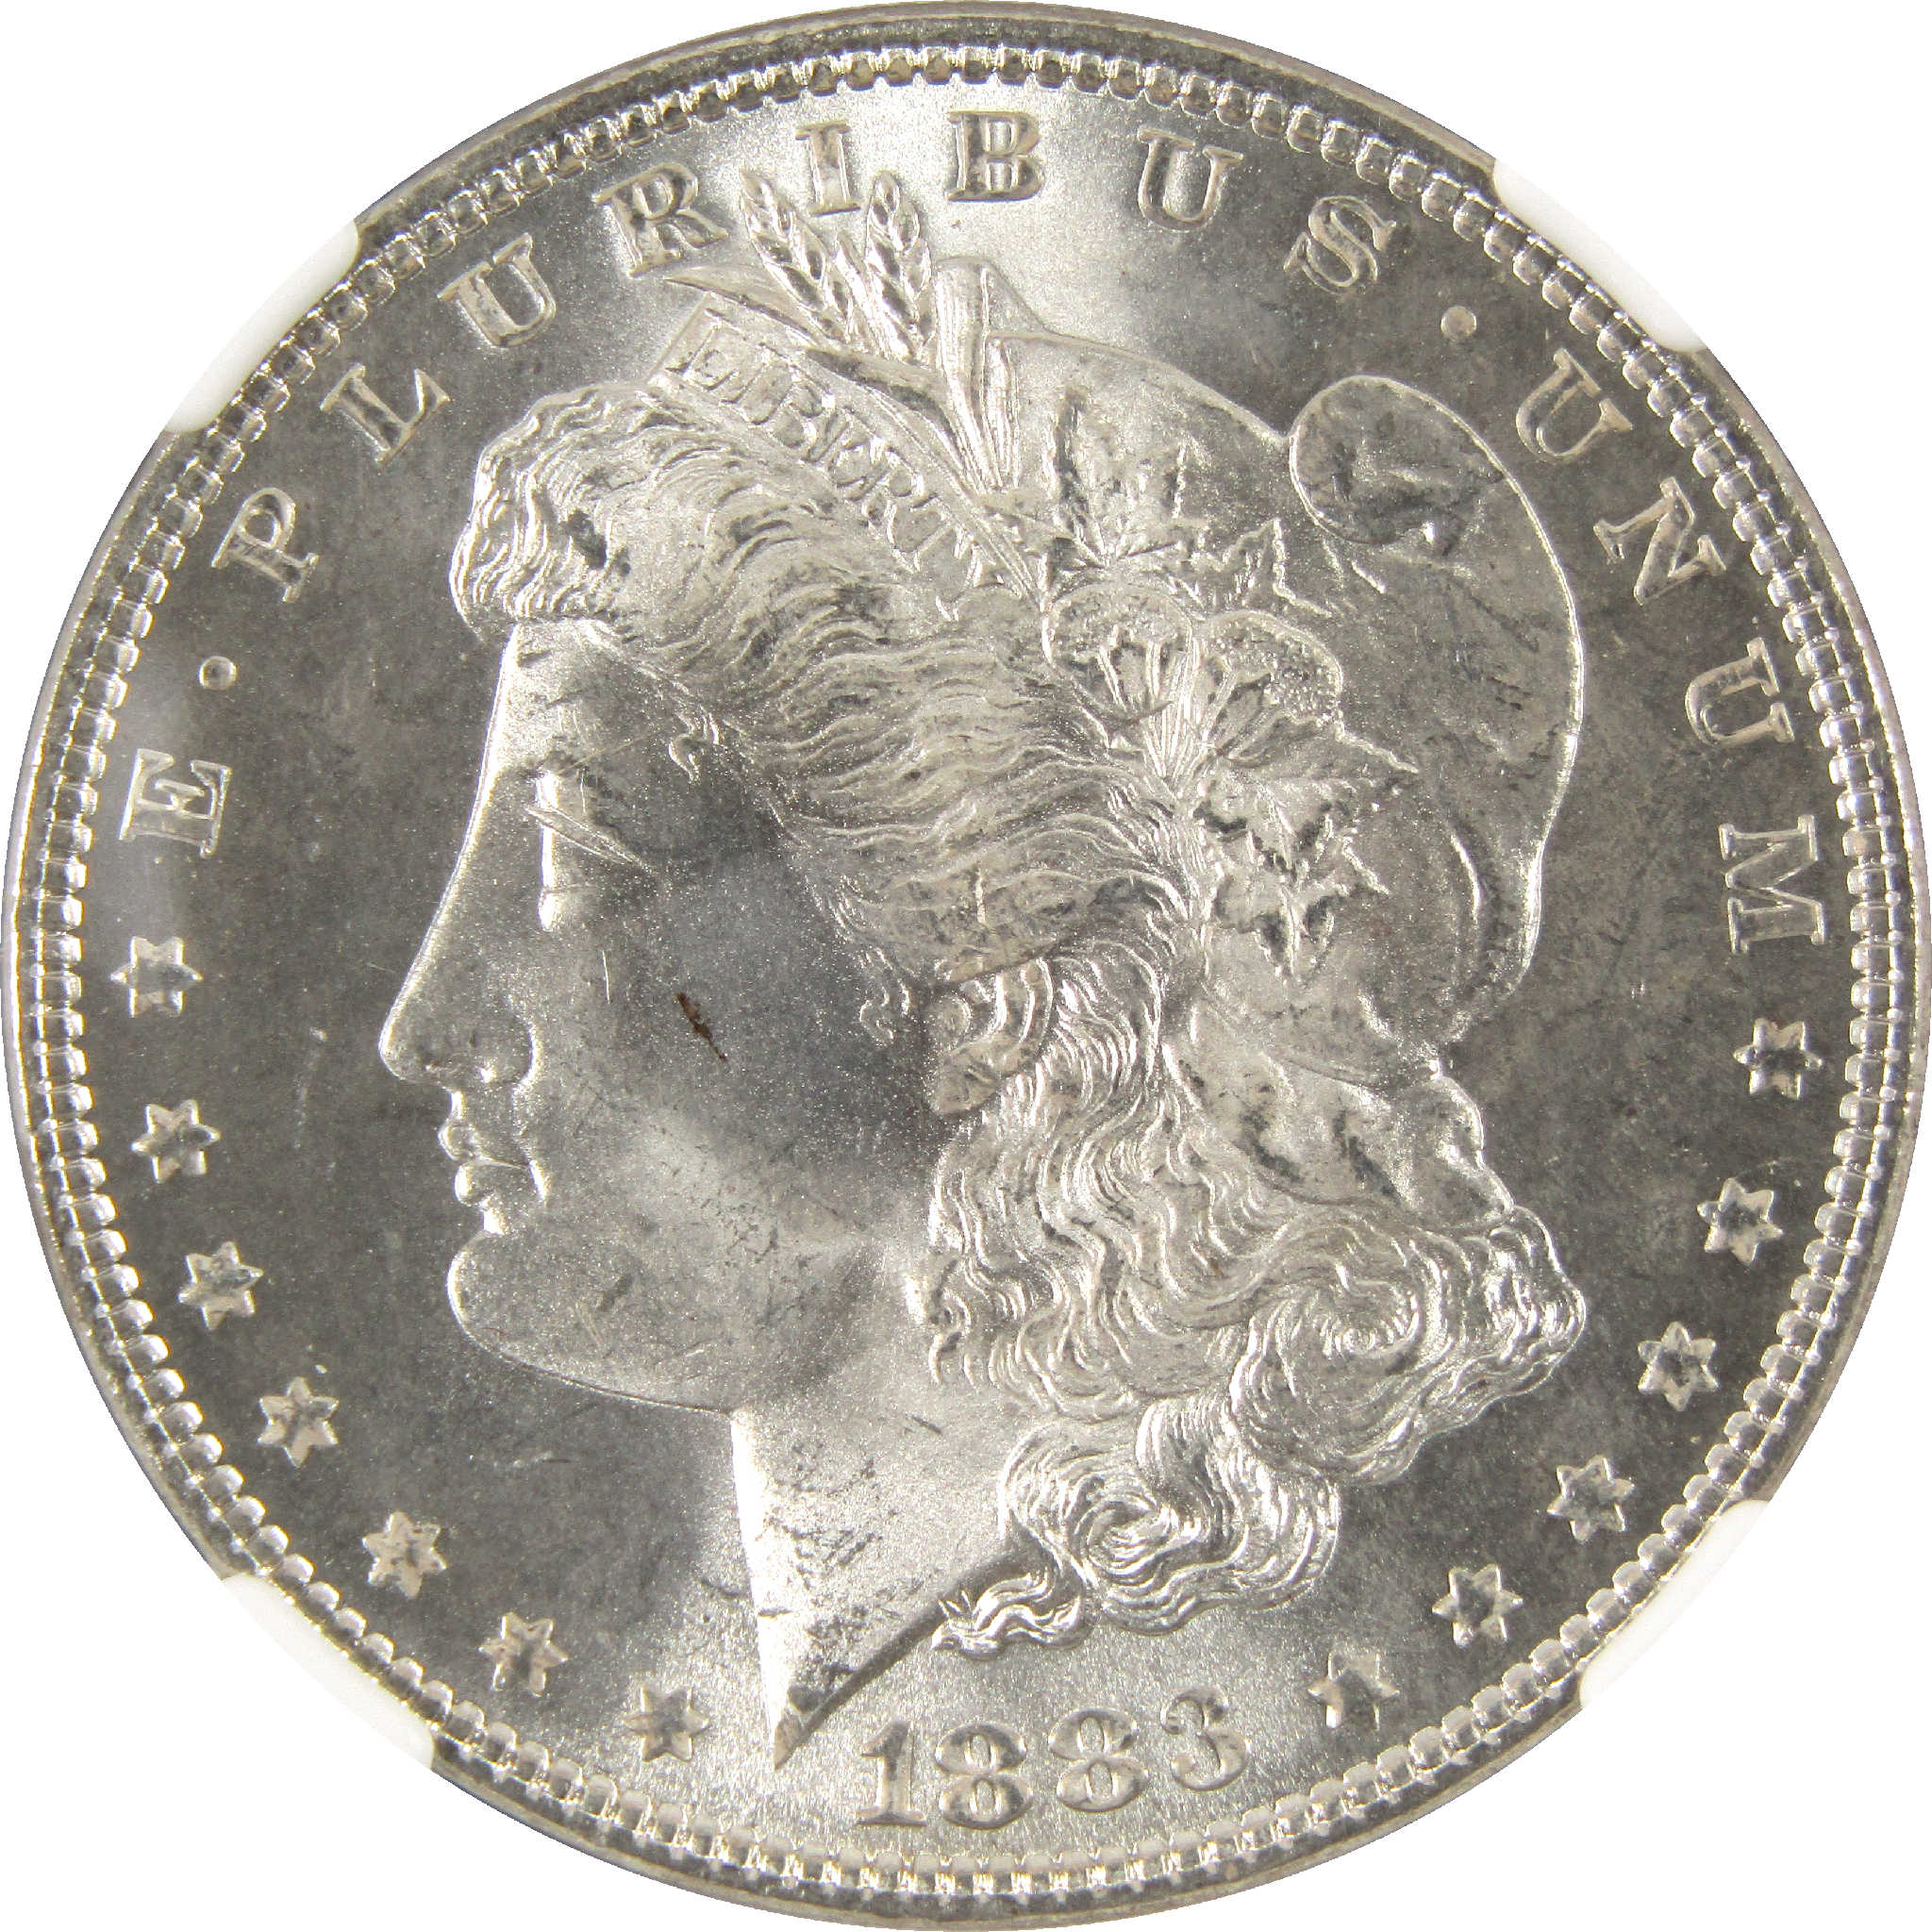 1883 Morgan Dollar MS 65 NGC Silver $1 Uncirculated Coin SKU:CPC6279 - Morgan coin - Morgan silver dollar - Morgan silver dollar for sale - Profile Coins &amp; Collectibles